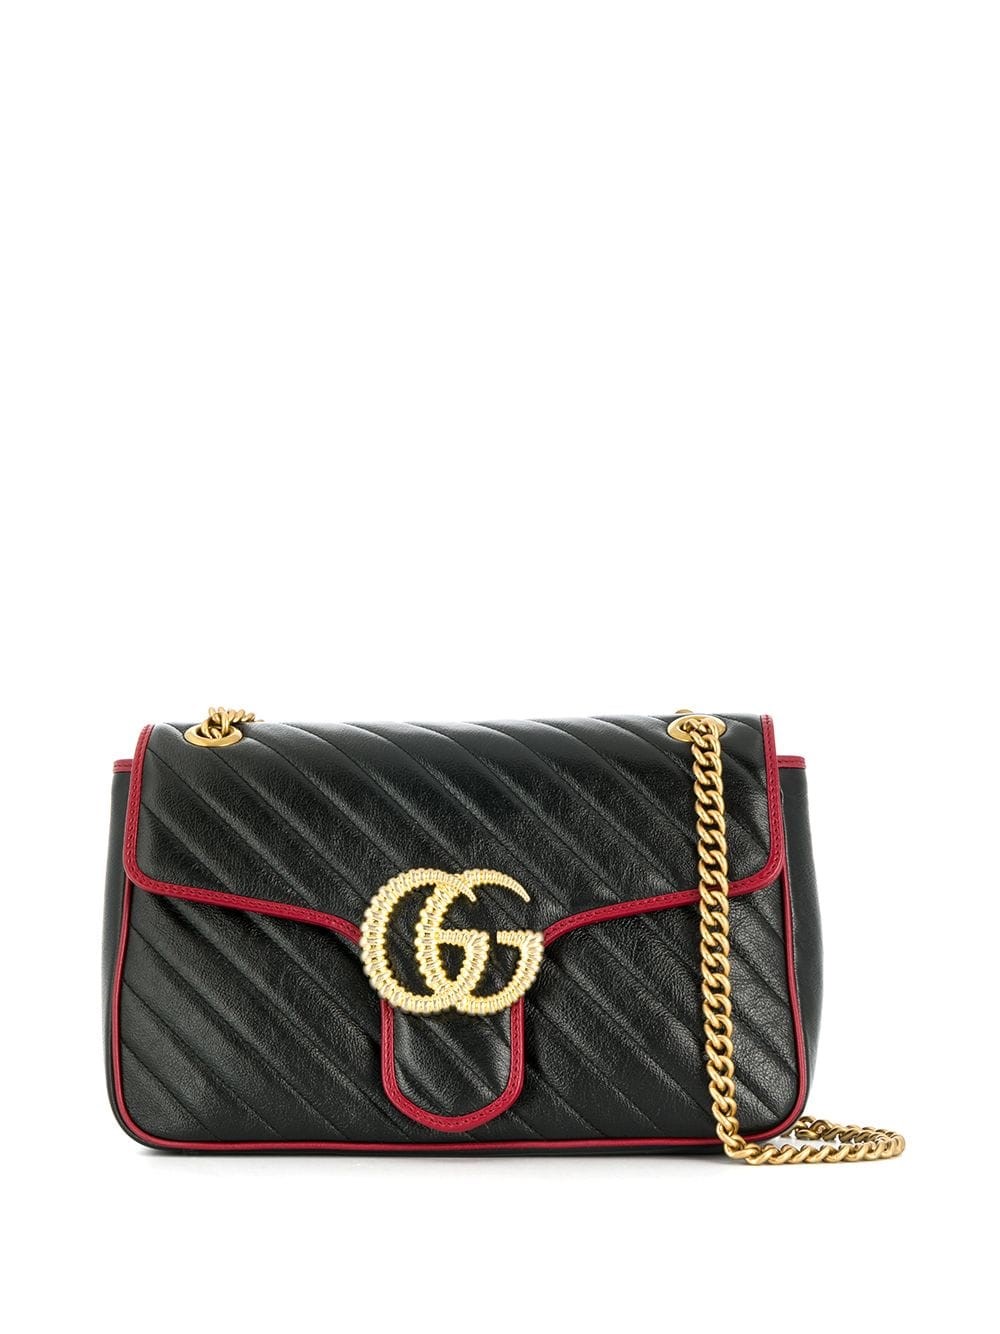 gucci marmont black friday